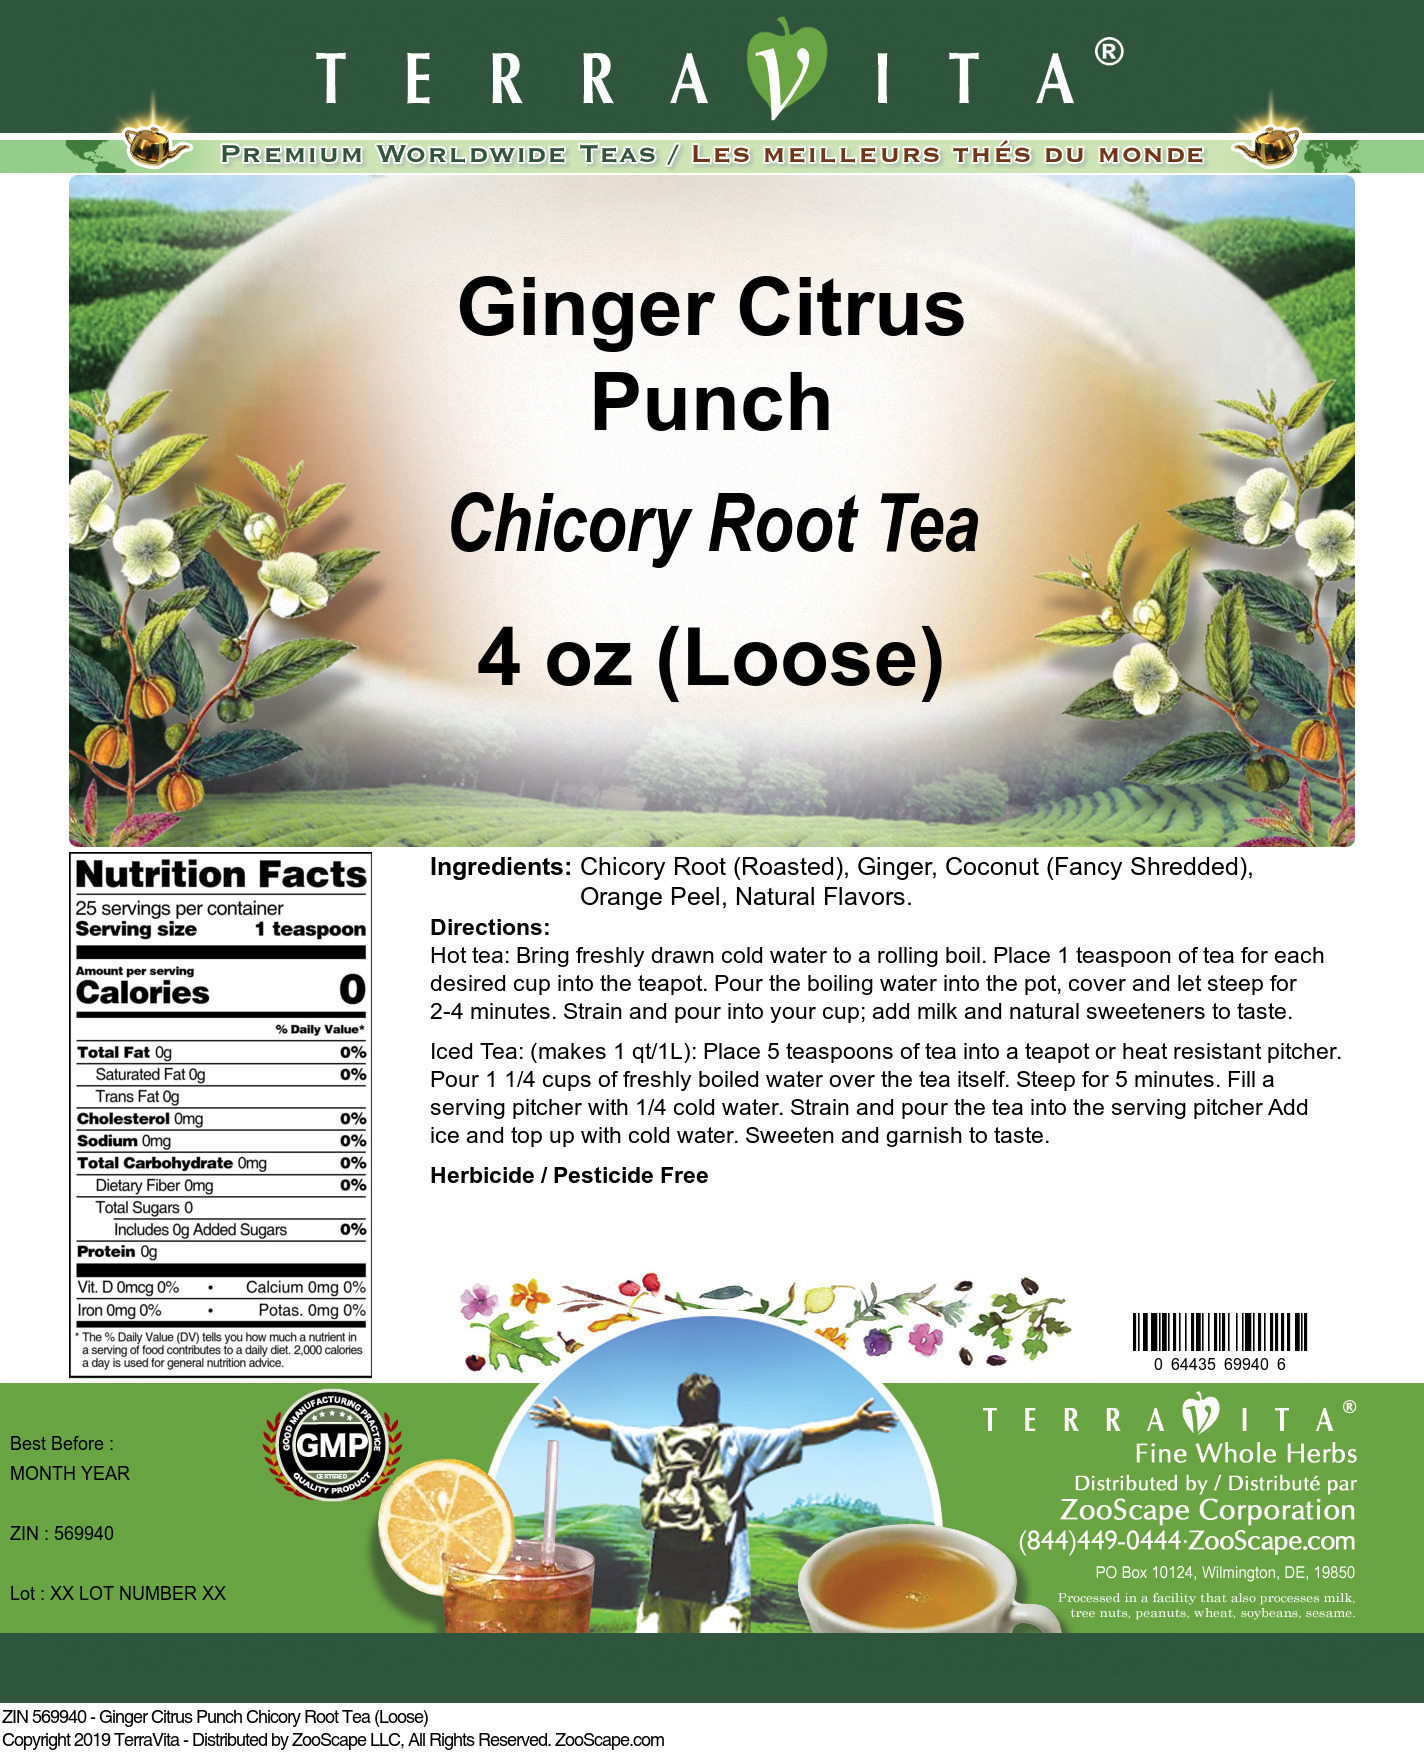 Ginger Citrus Punch Chicory Root Tea (Loose) - Label